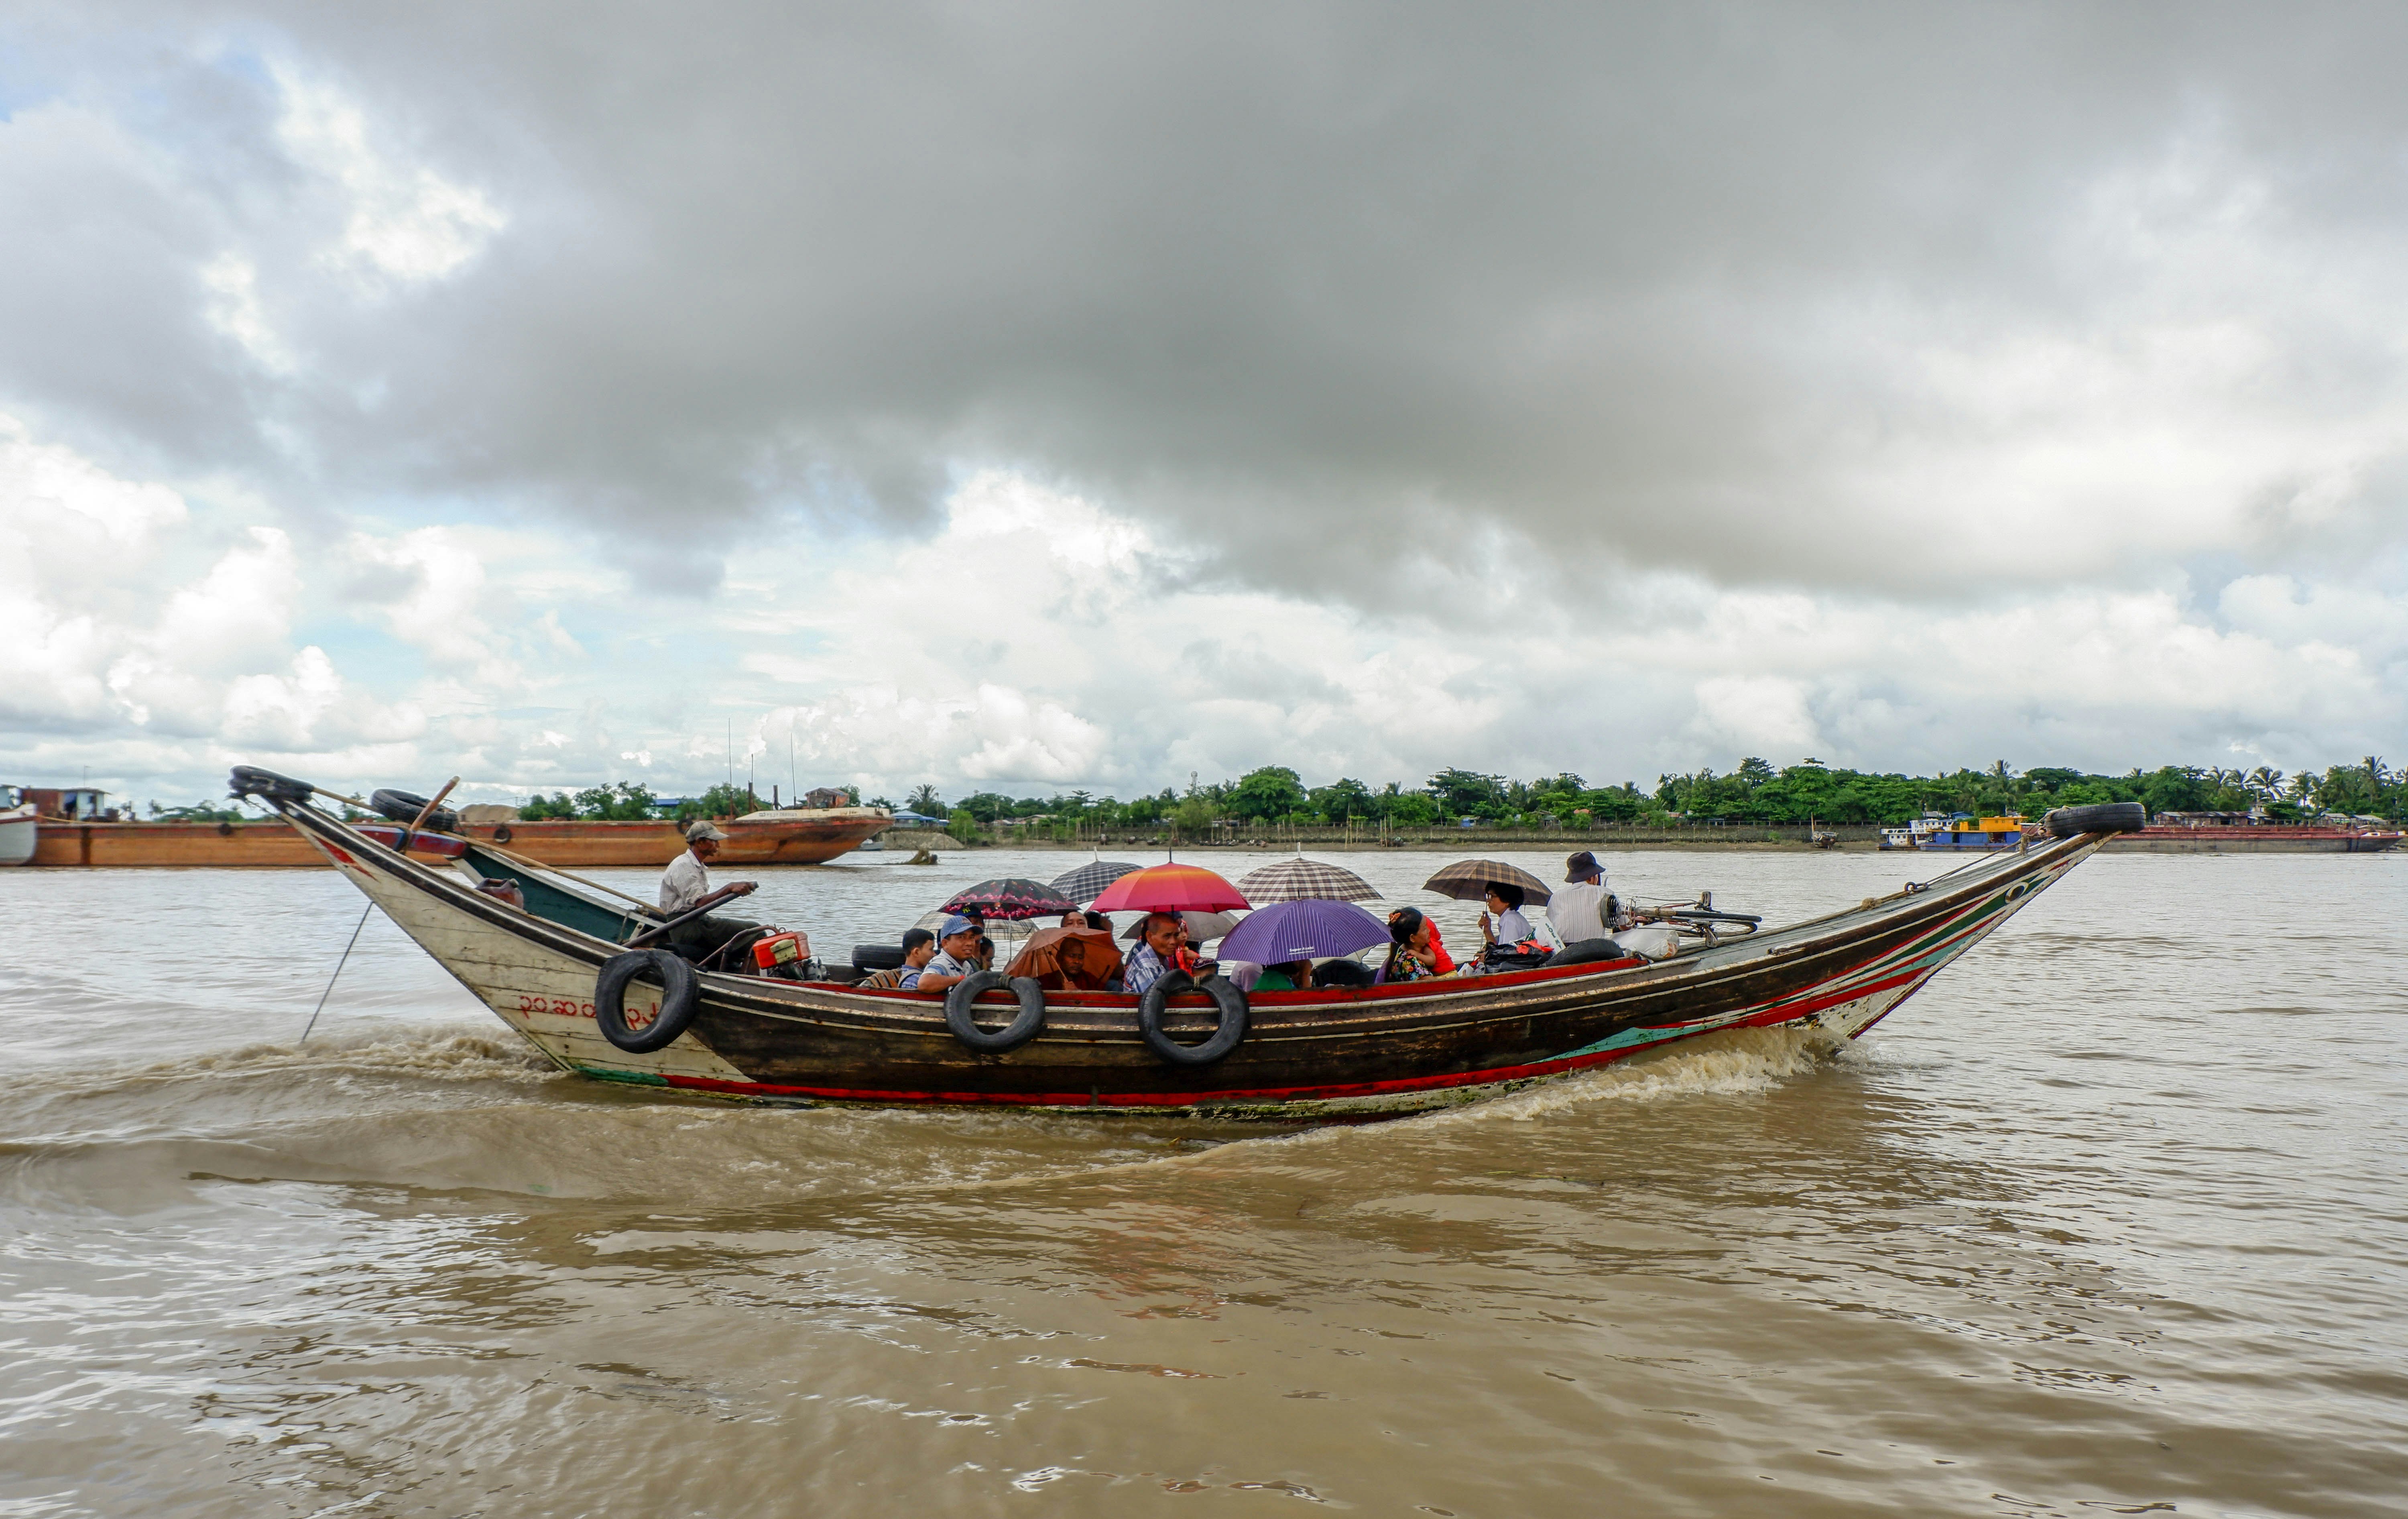 A group of people, some with unbrellas aboard a long, narrow, open boat, are crossing the river towards Seikgyi island. 